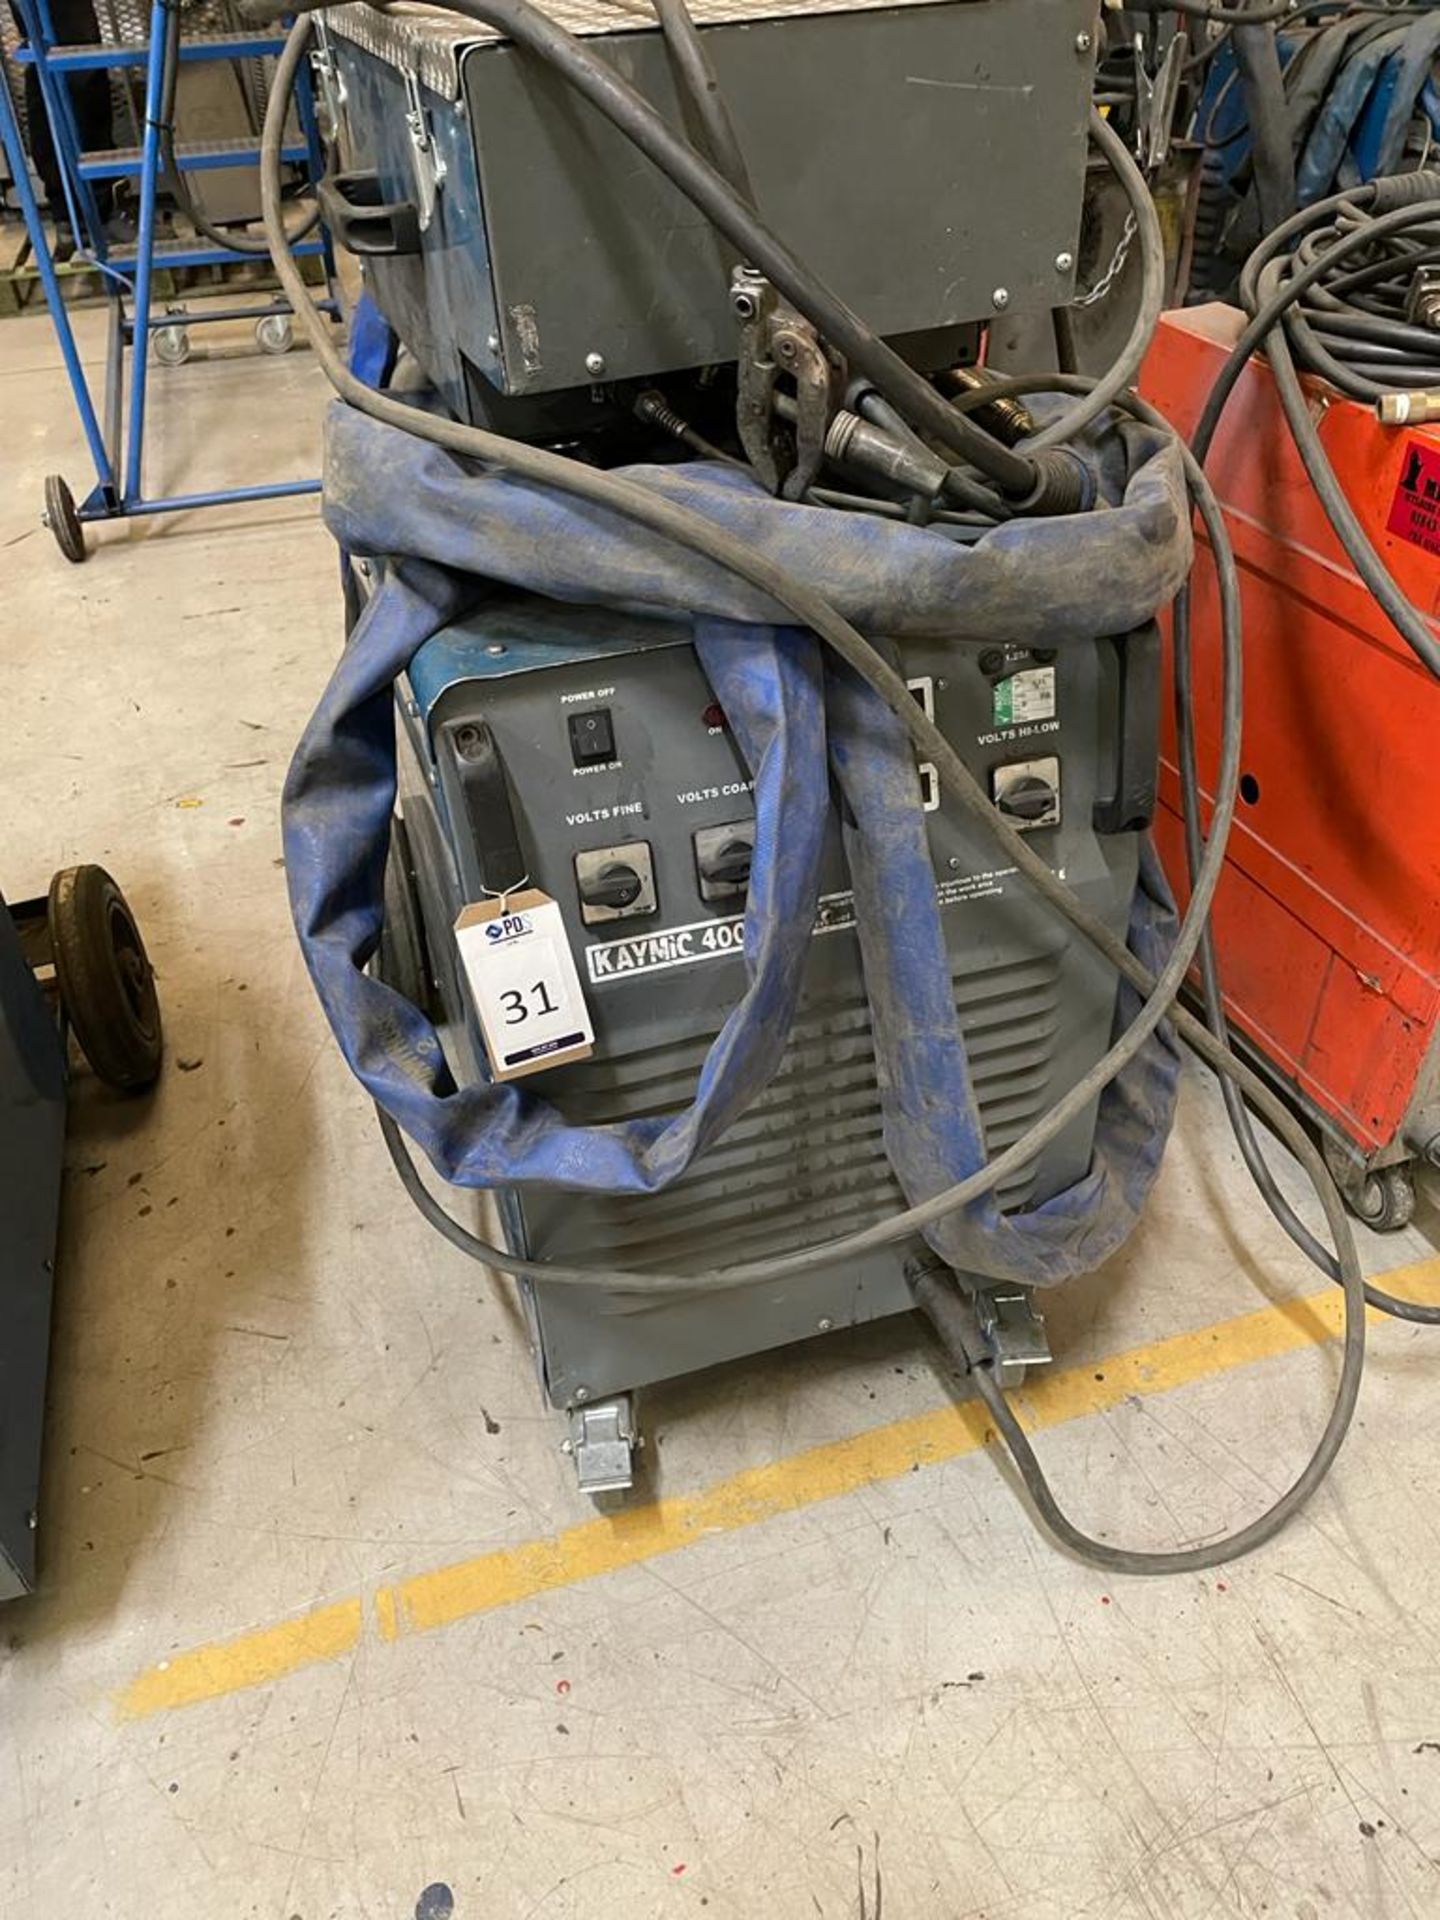 Tecarc Kaymig 400S Mig Welder, Serial Number TA021224667 with F41G Wire Feed Unit (Location Dover.